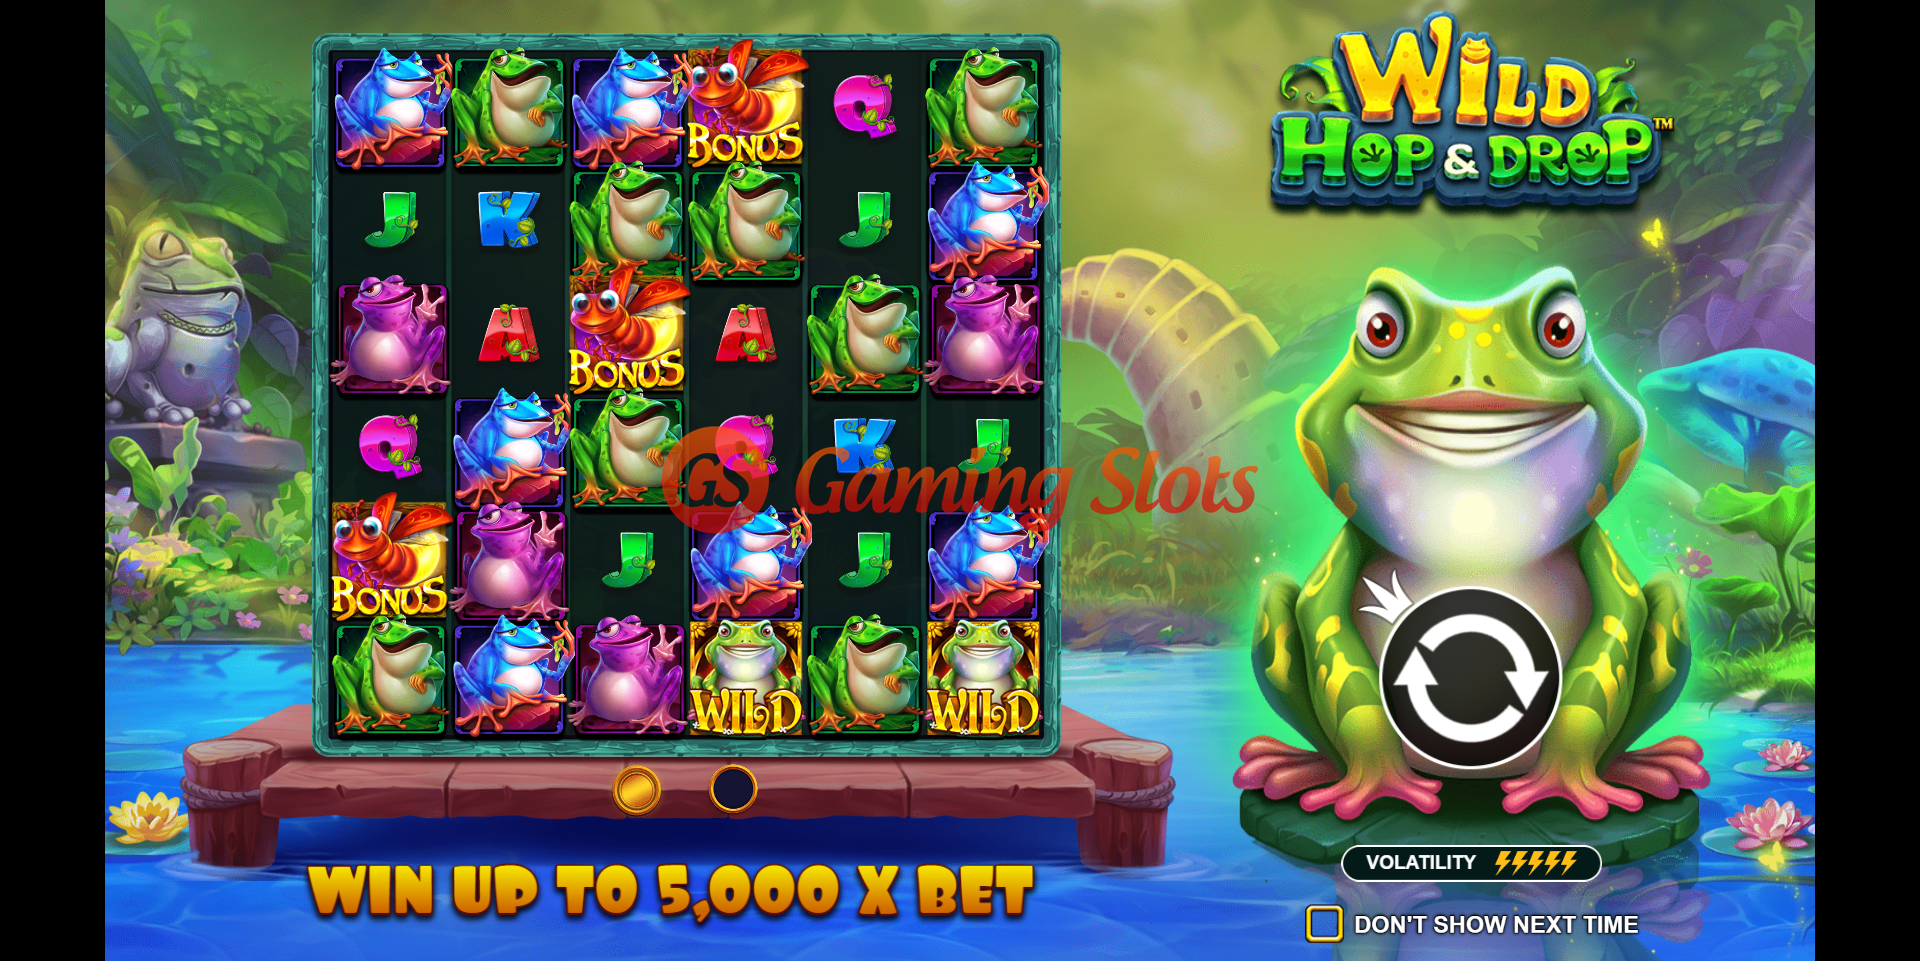 Game Intro for Wild Hop and Drop slot from Pragmatic Play